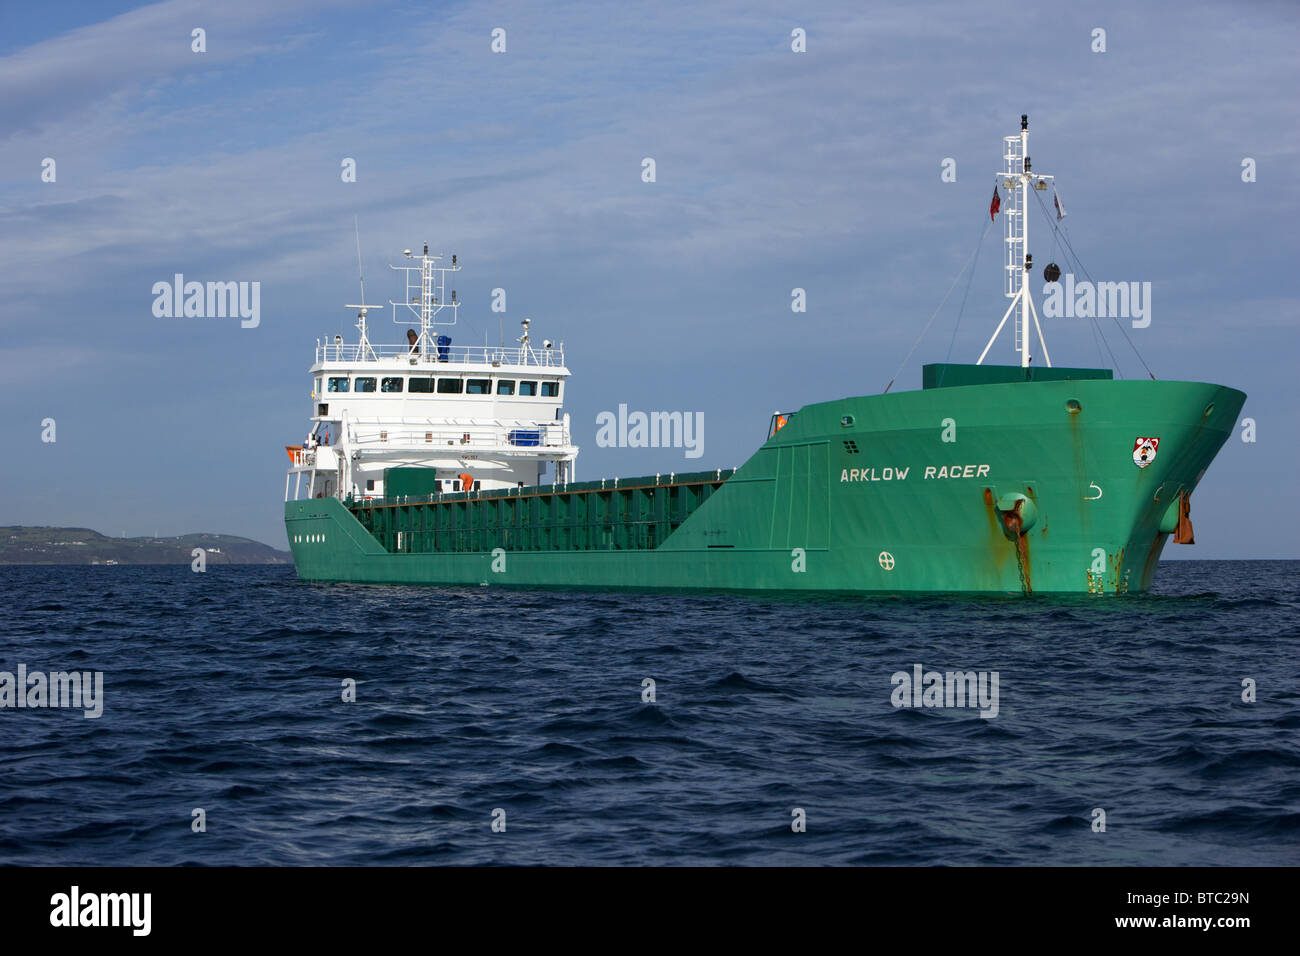 loaded arklow racer irish dry cargo ship at anchor in coastal waters of the uk Stock Photo